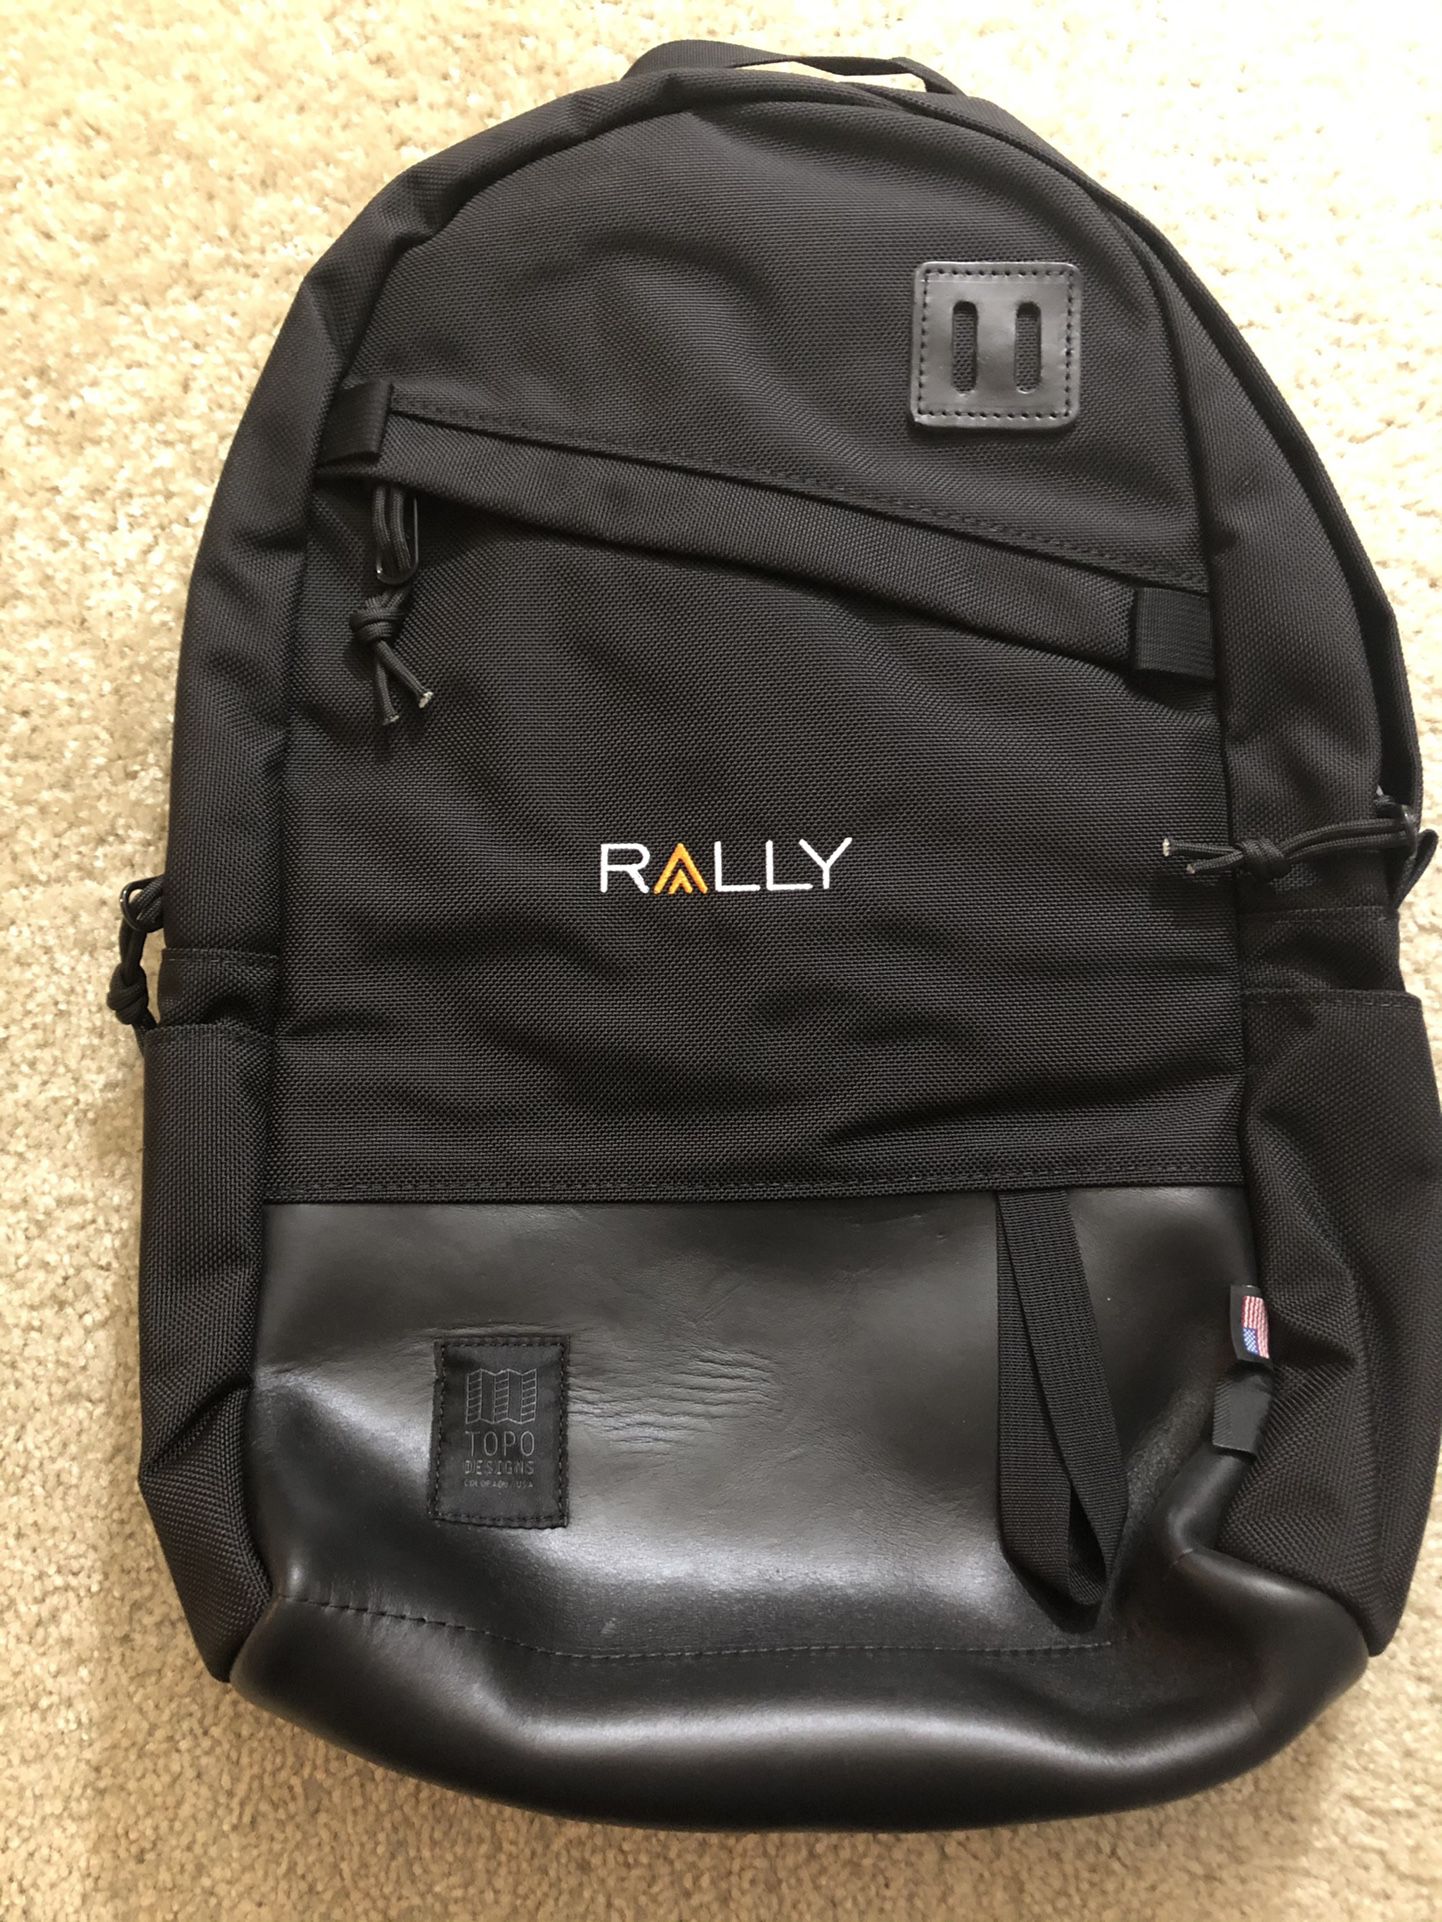 Laptop Backpack Unopened, Brand New